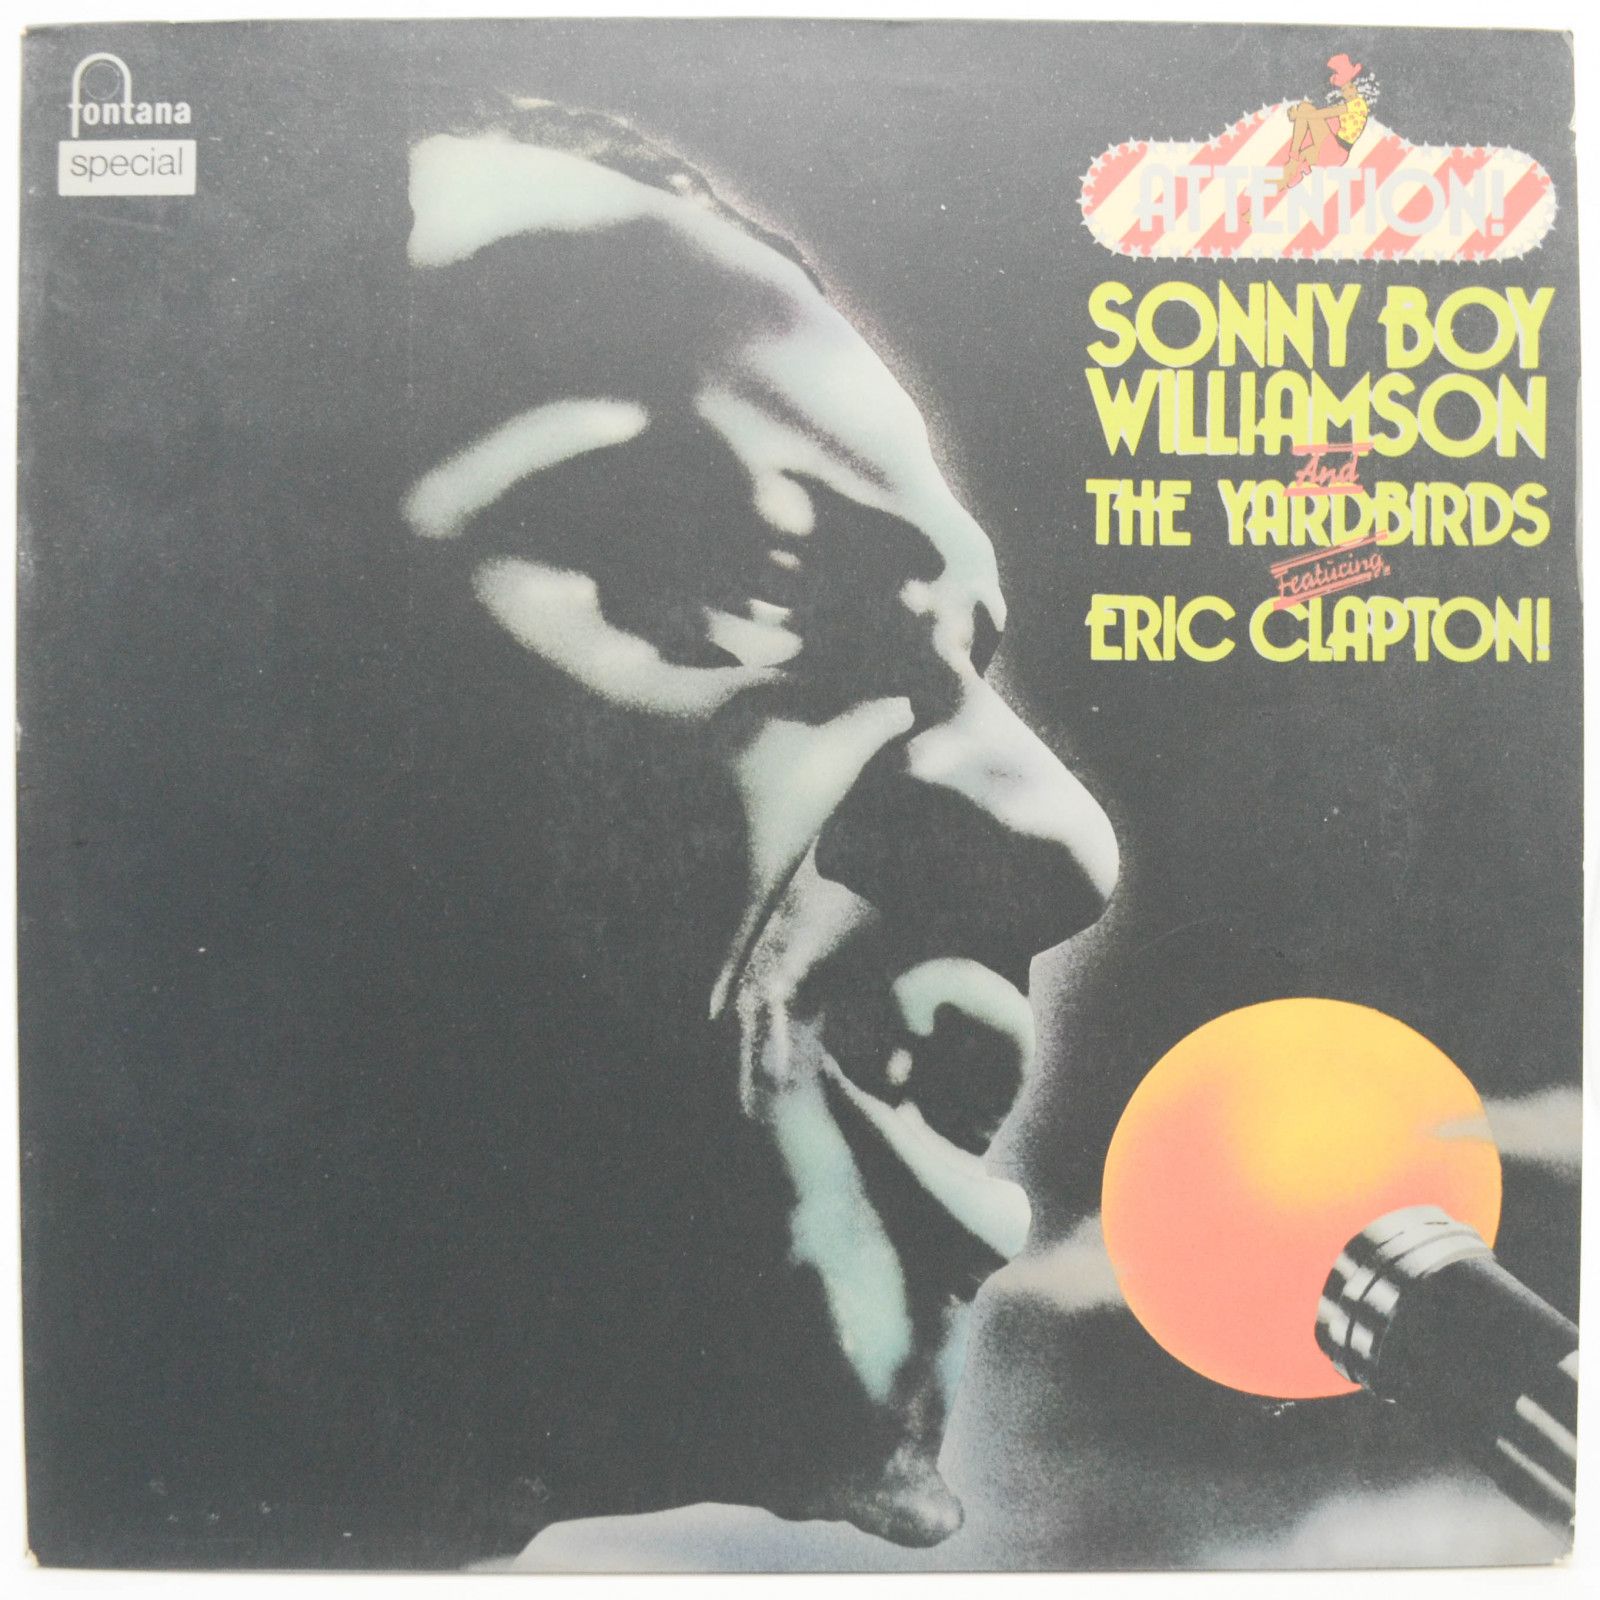 Sonny Boy Williamson And The Yardbirds Featuring Eric Clapton — Attention! Sonny Boy Williamson And The Yardbirds Featuring Eric Clapton!, 1975